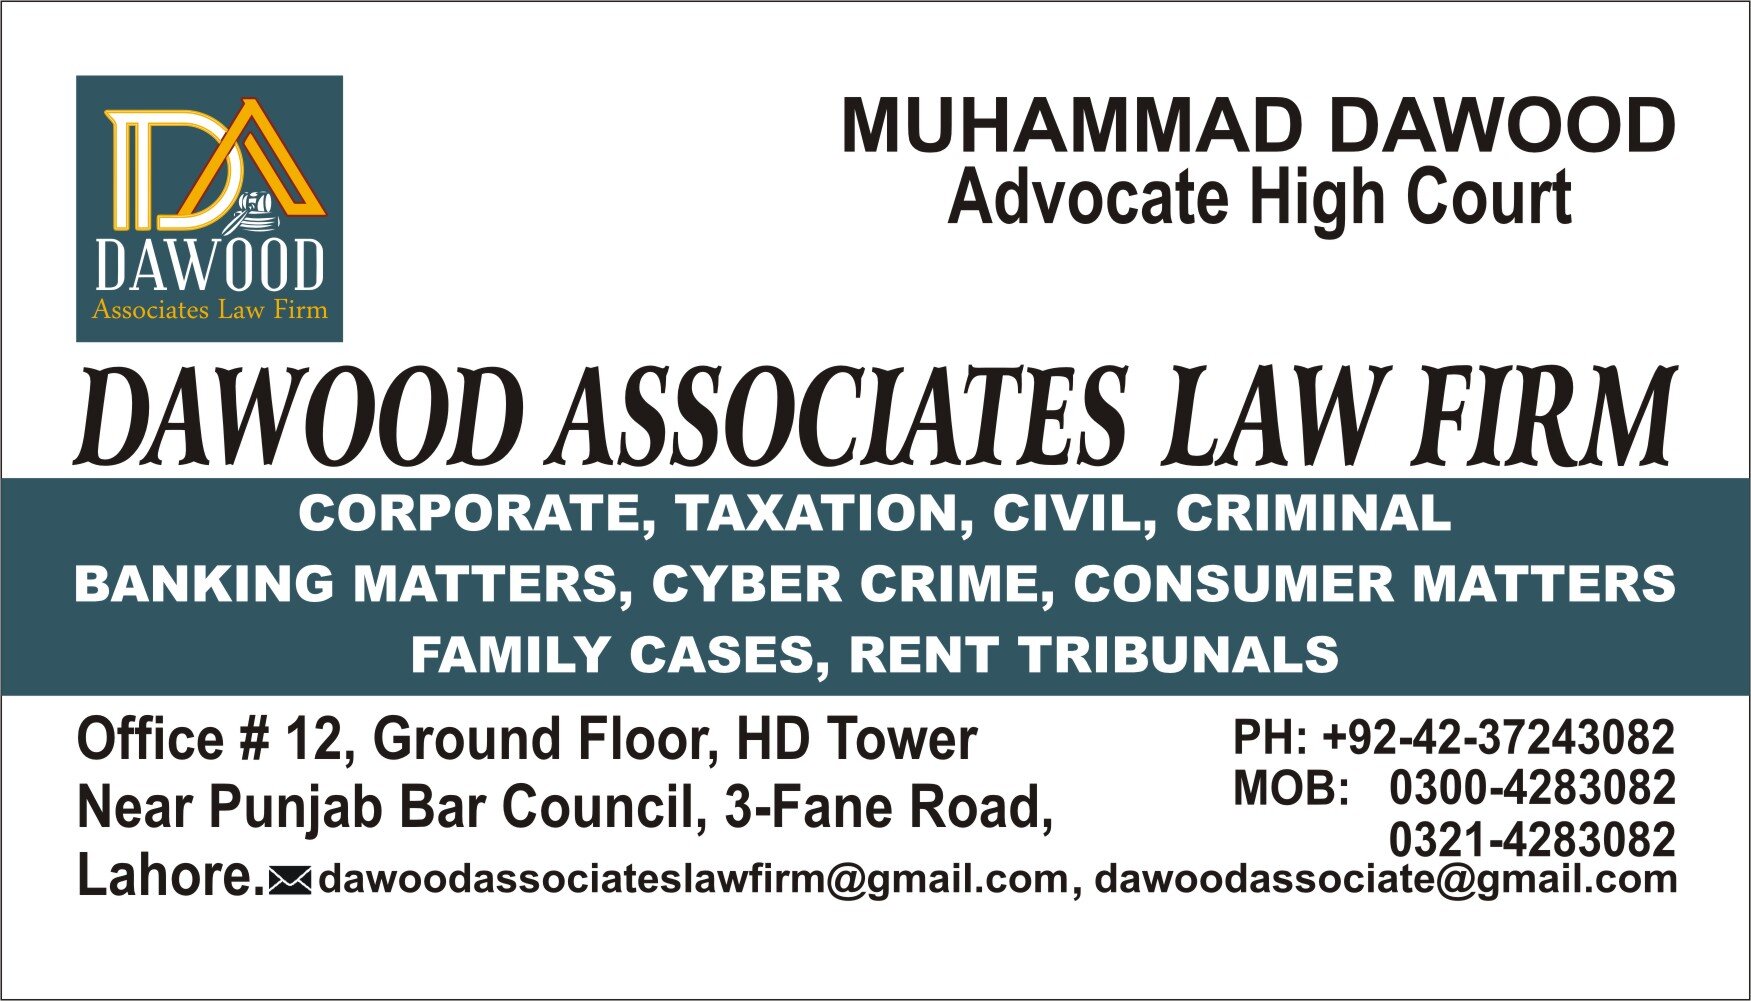 Dawood Associates Law Firm cover photo